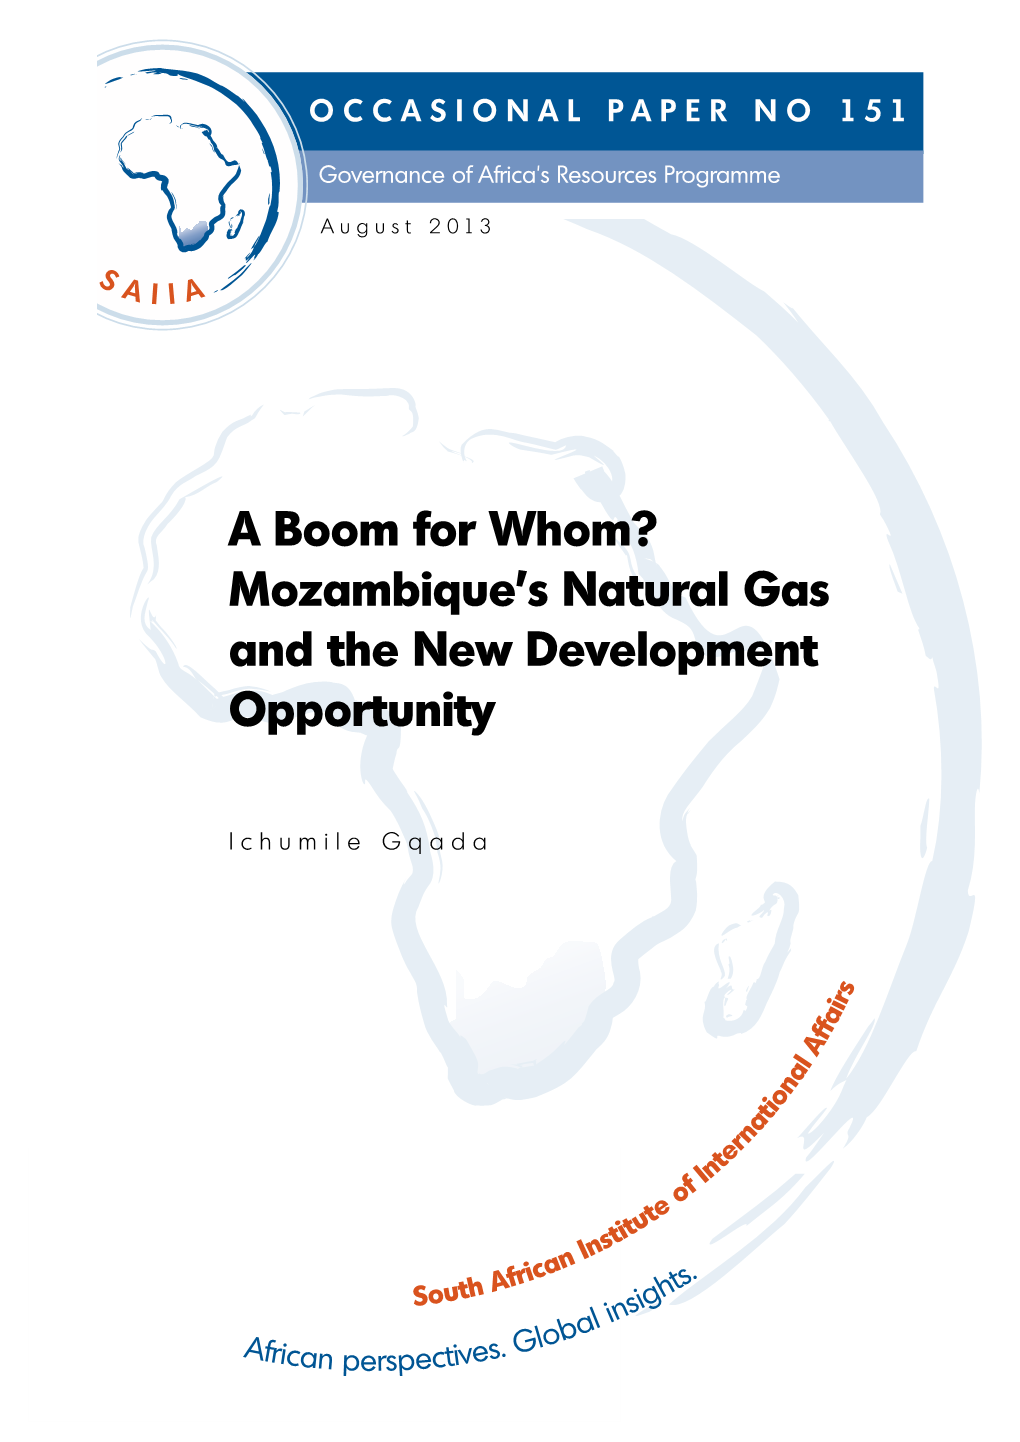 Mozambique's Natural Gas and the New Development Opportunity